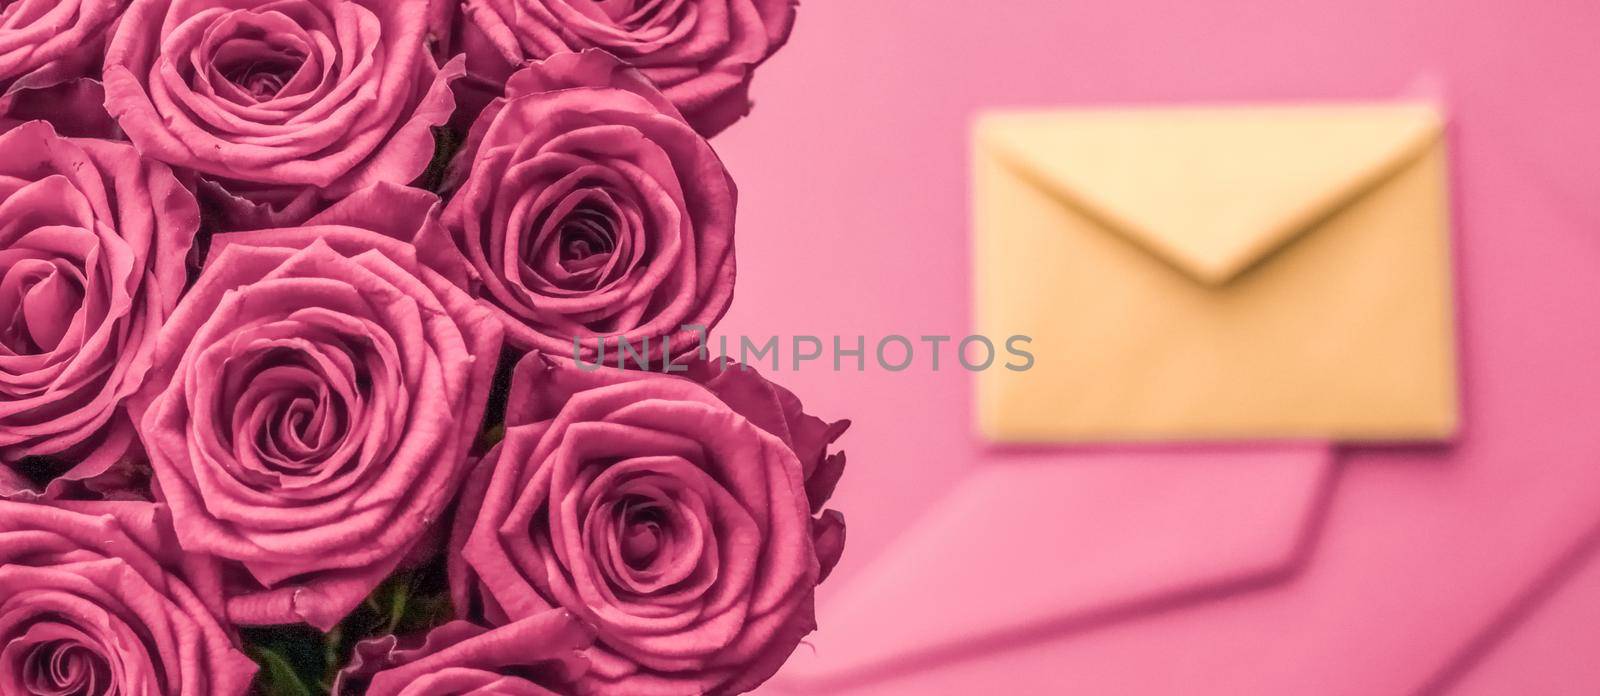 Holidays gift, floral present and happy relationship concept - Holiday love letter and flowers delivery, luxury bouquet of roses and card on blush pink background for romantic holiday design